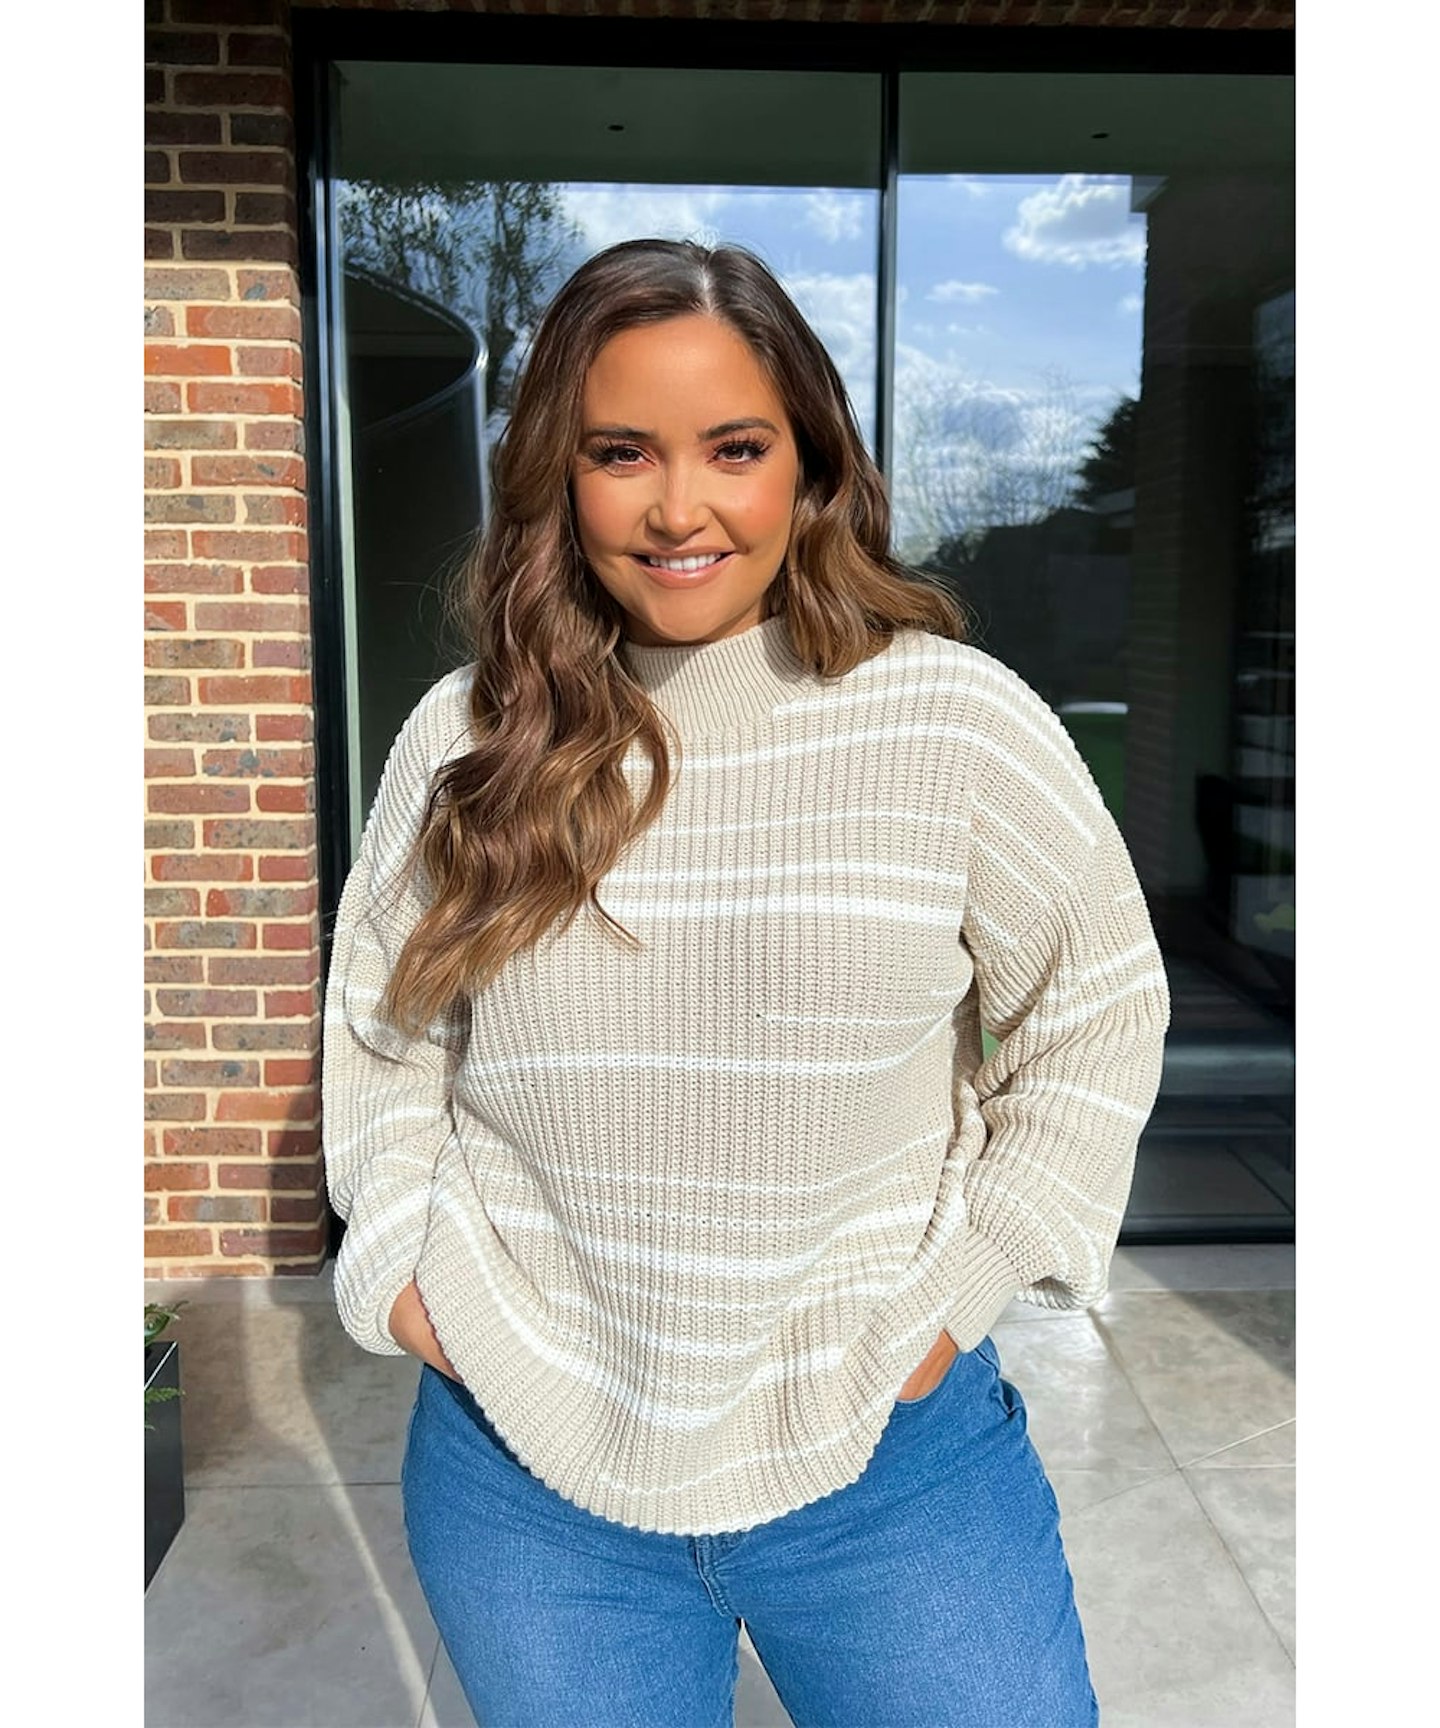 Nothing To Wear Jacqueline Jossa Celebrity Hoodies -FunkyTradition